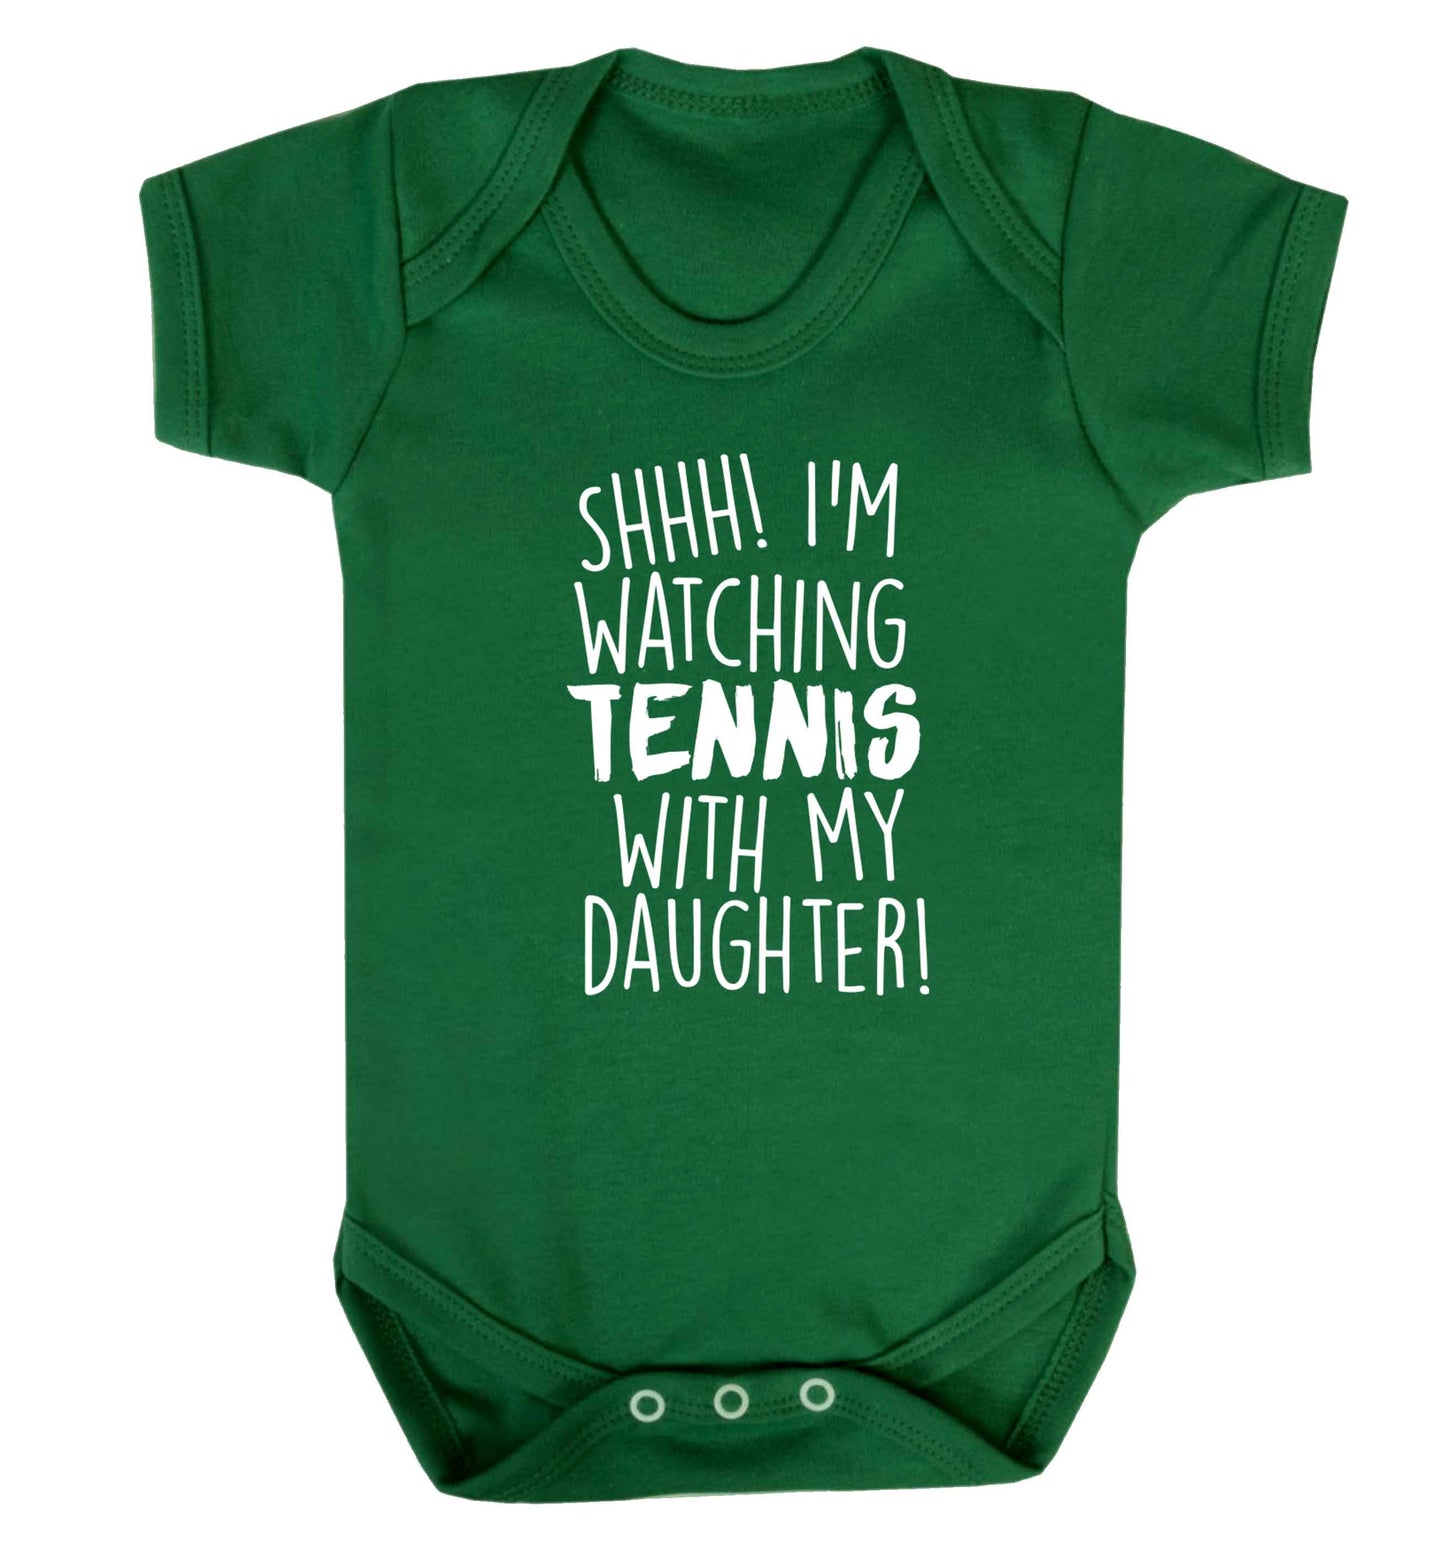 Shh! I'm watching tennis with my daughter! Baby Vest green 18-24 months